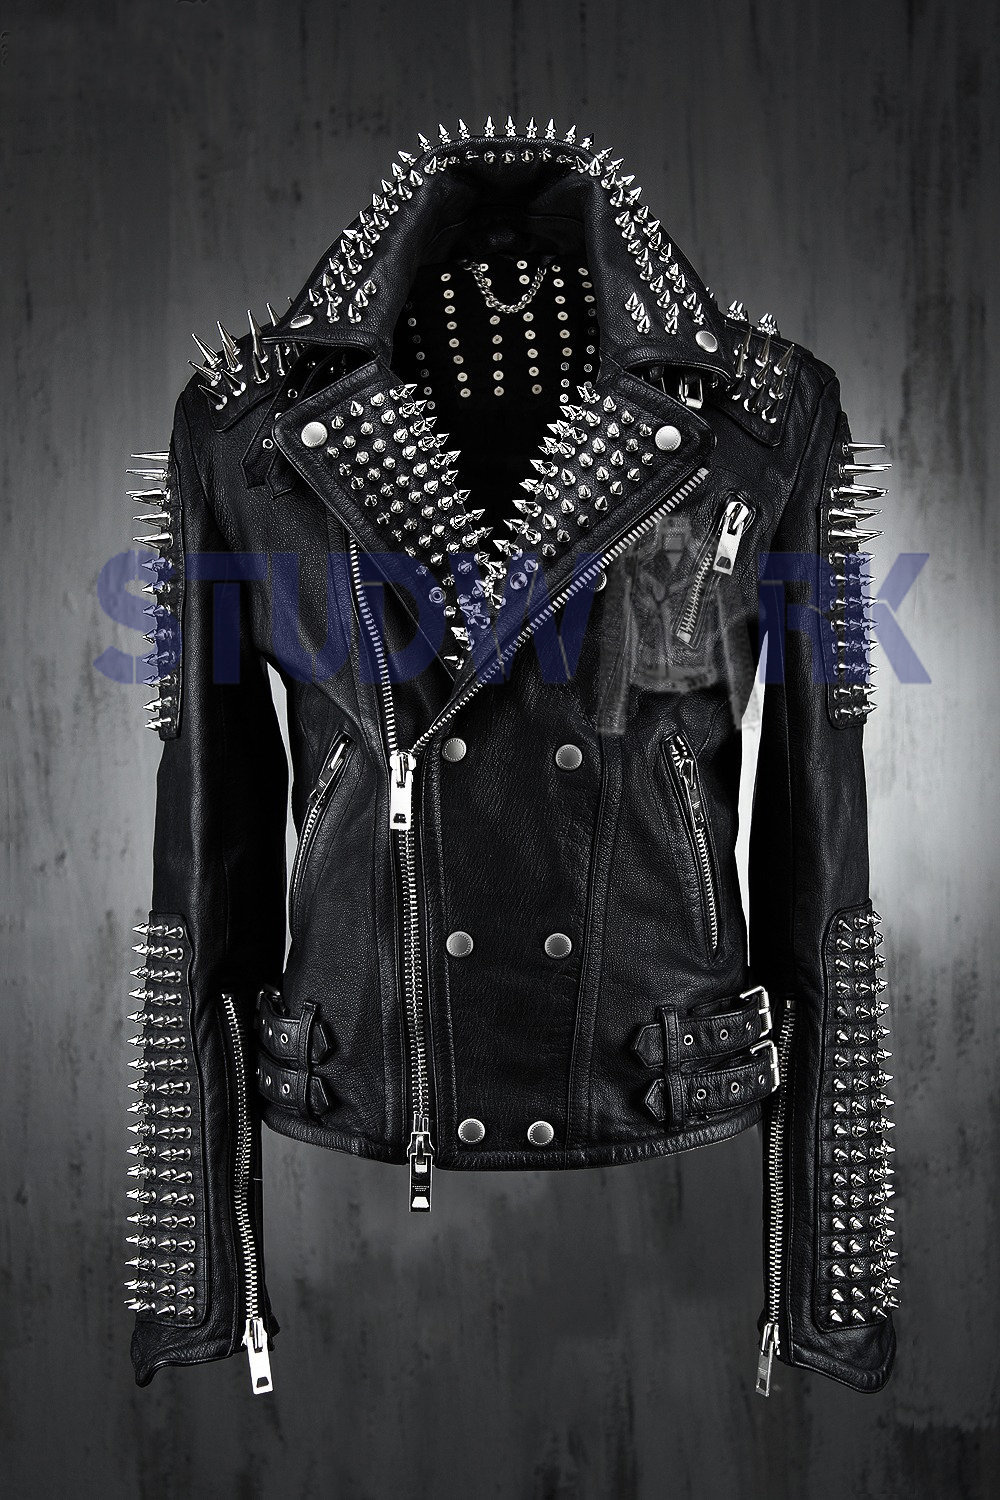 Trending: STUDS AND SPIKES Leather Jackets and Boots 70's Rockstar